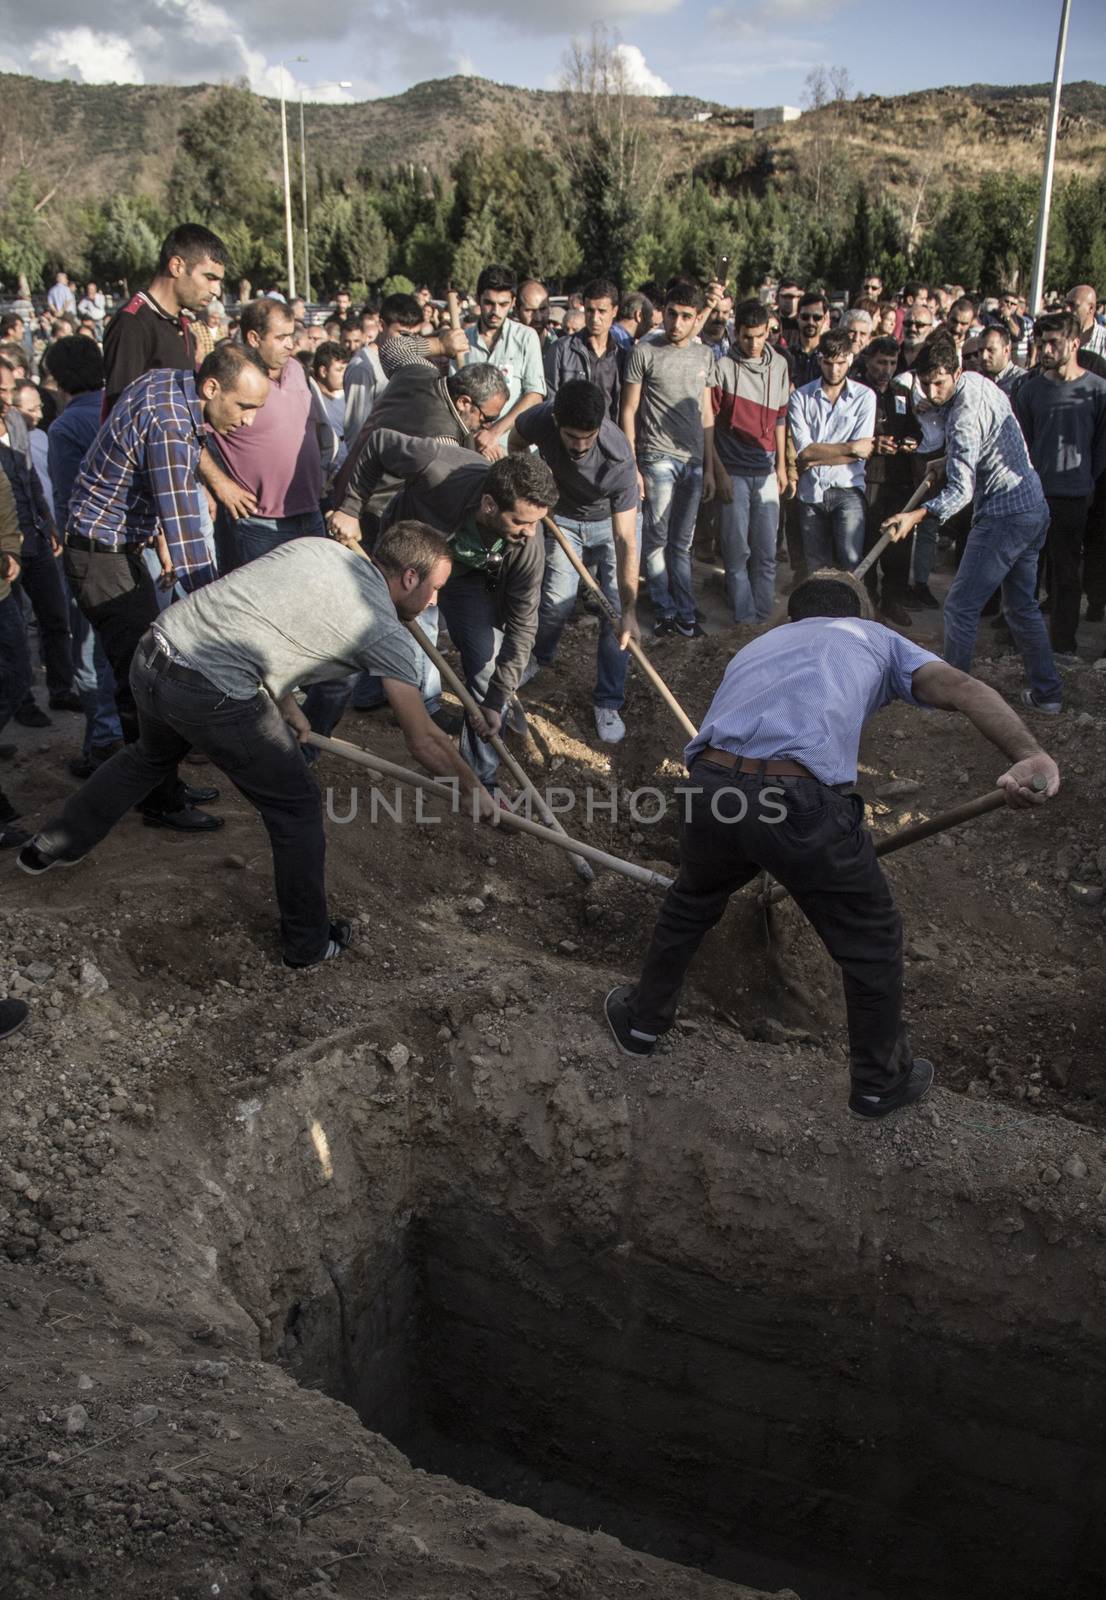 TURKEY, Izmir: Around a thousand people turned out to pay their respects on October 11, 2015 at the funerals of two people who died in the Ankara bombings. Berna Koc, a student and Ayse Deniz, a local leader of the pro-Kurdish People's Democratic Party (HDP) were laid to rest in their home town of Izmir. 